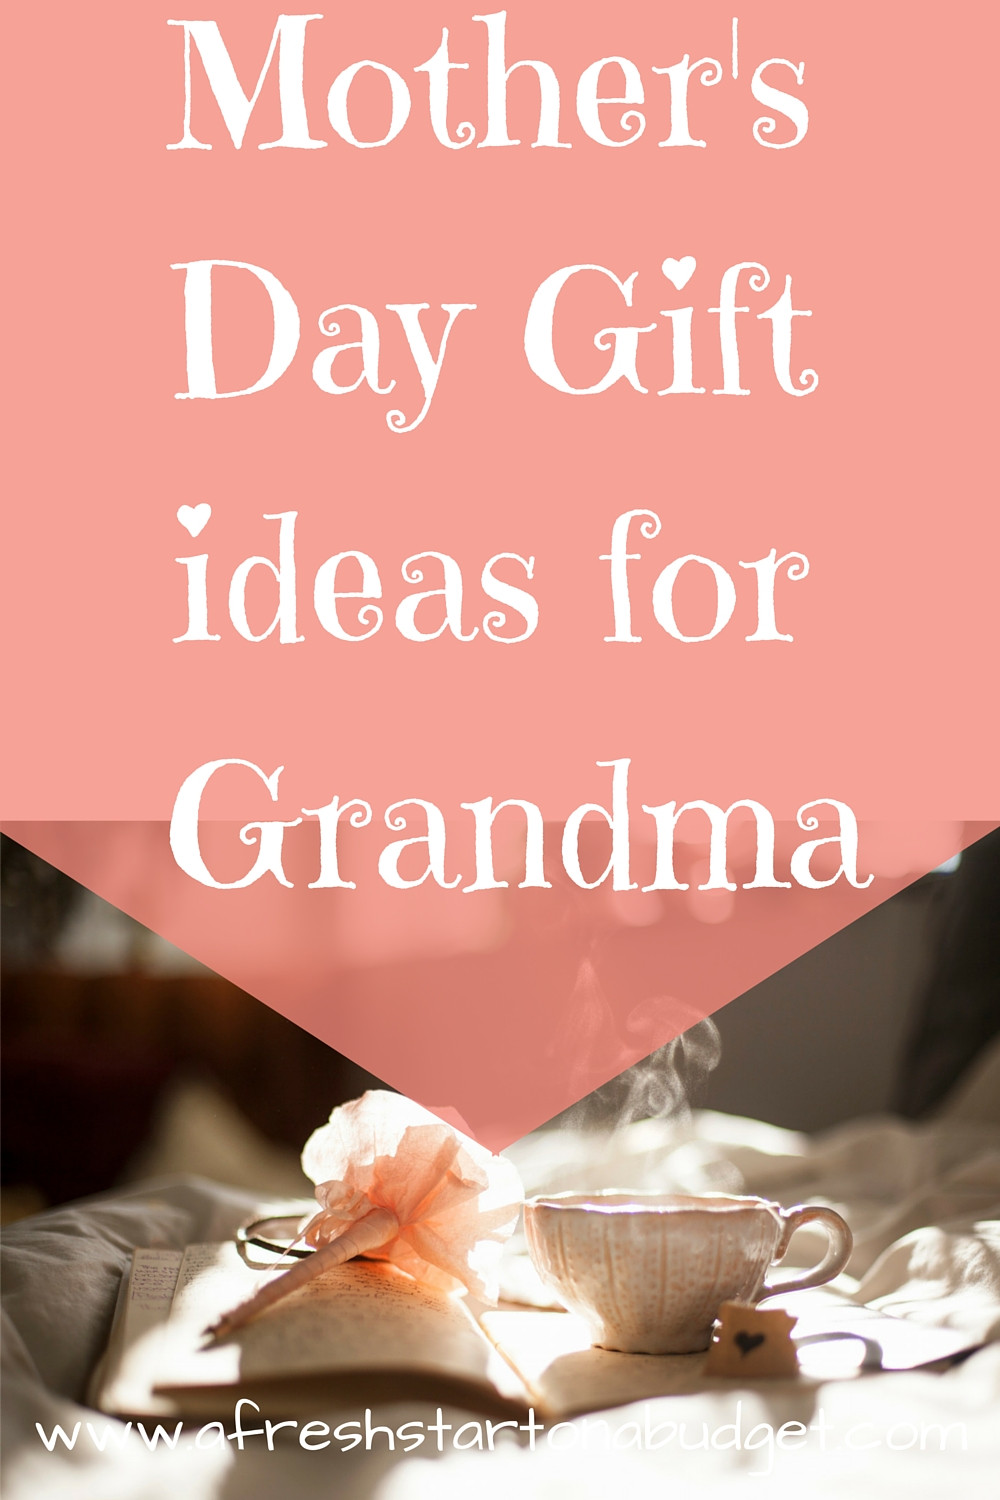 Mother's Day Gift Ideas For Grandmother
 Mother s Day Gift ideas for Grandma A Fresh Start on a